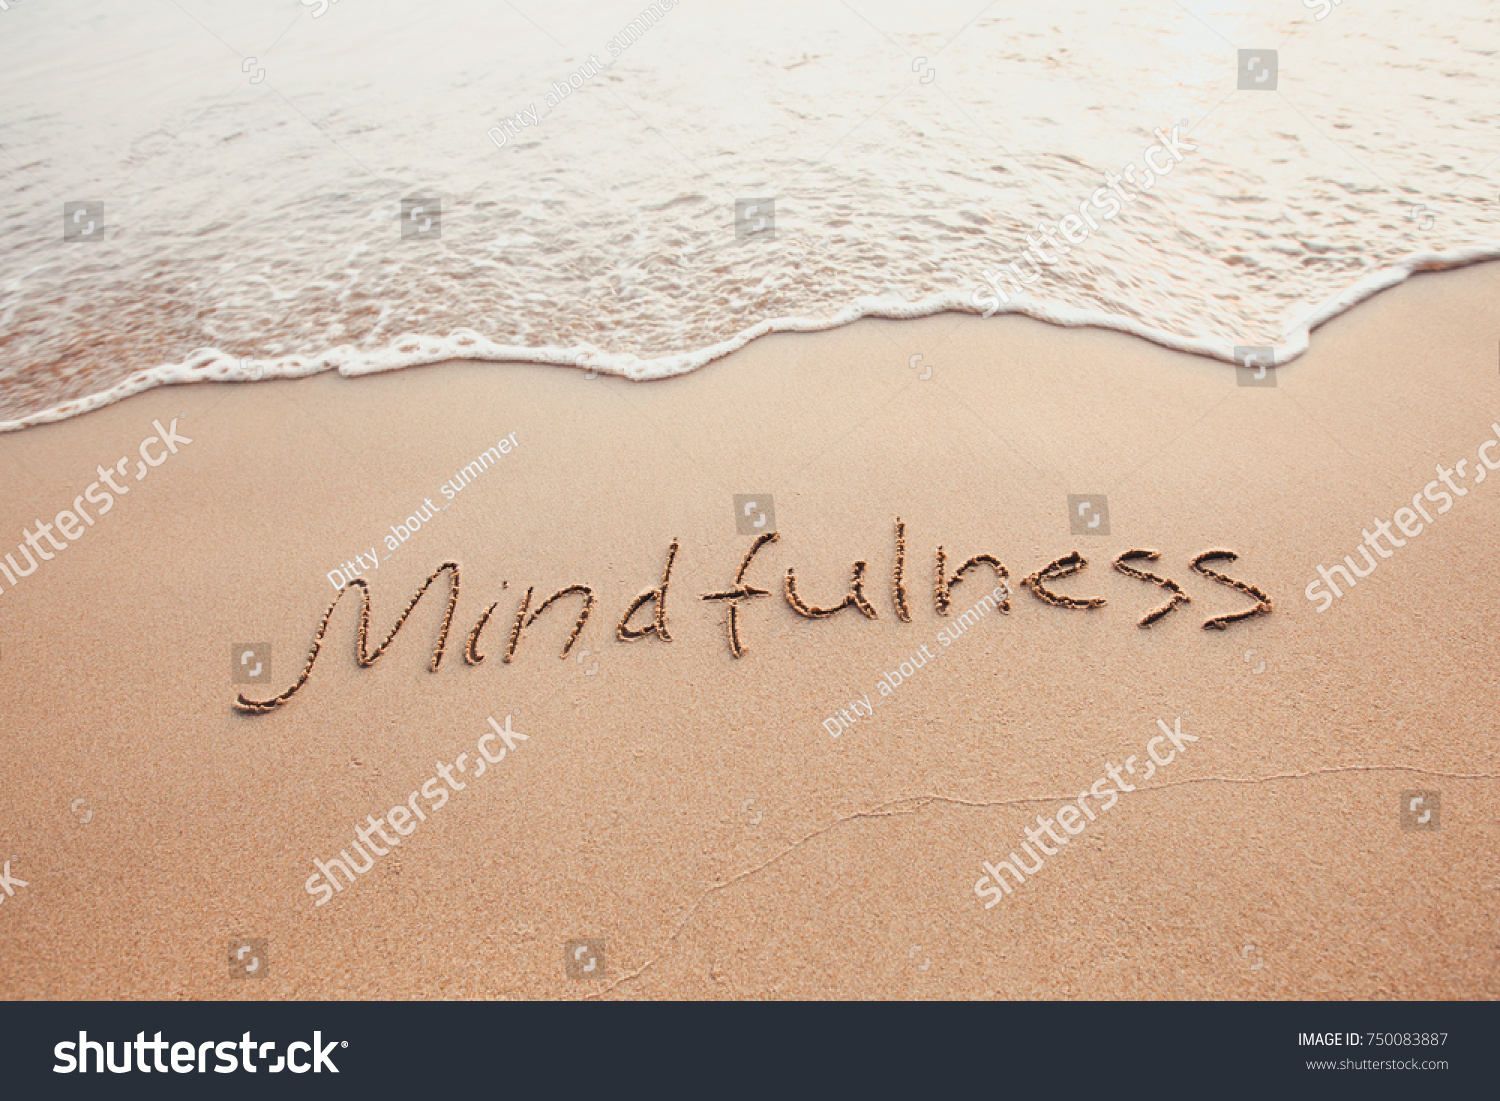 mindfulness concept, mindful living, text written on the sand of beach #750083887